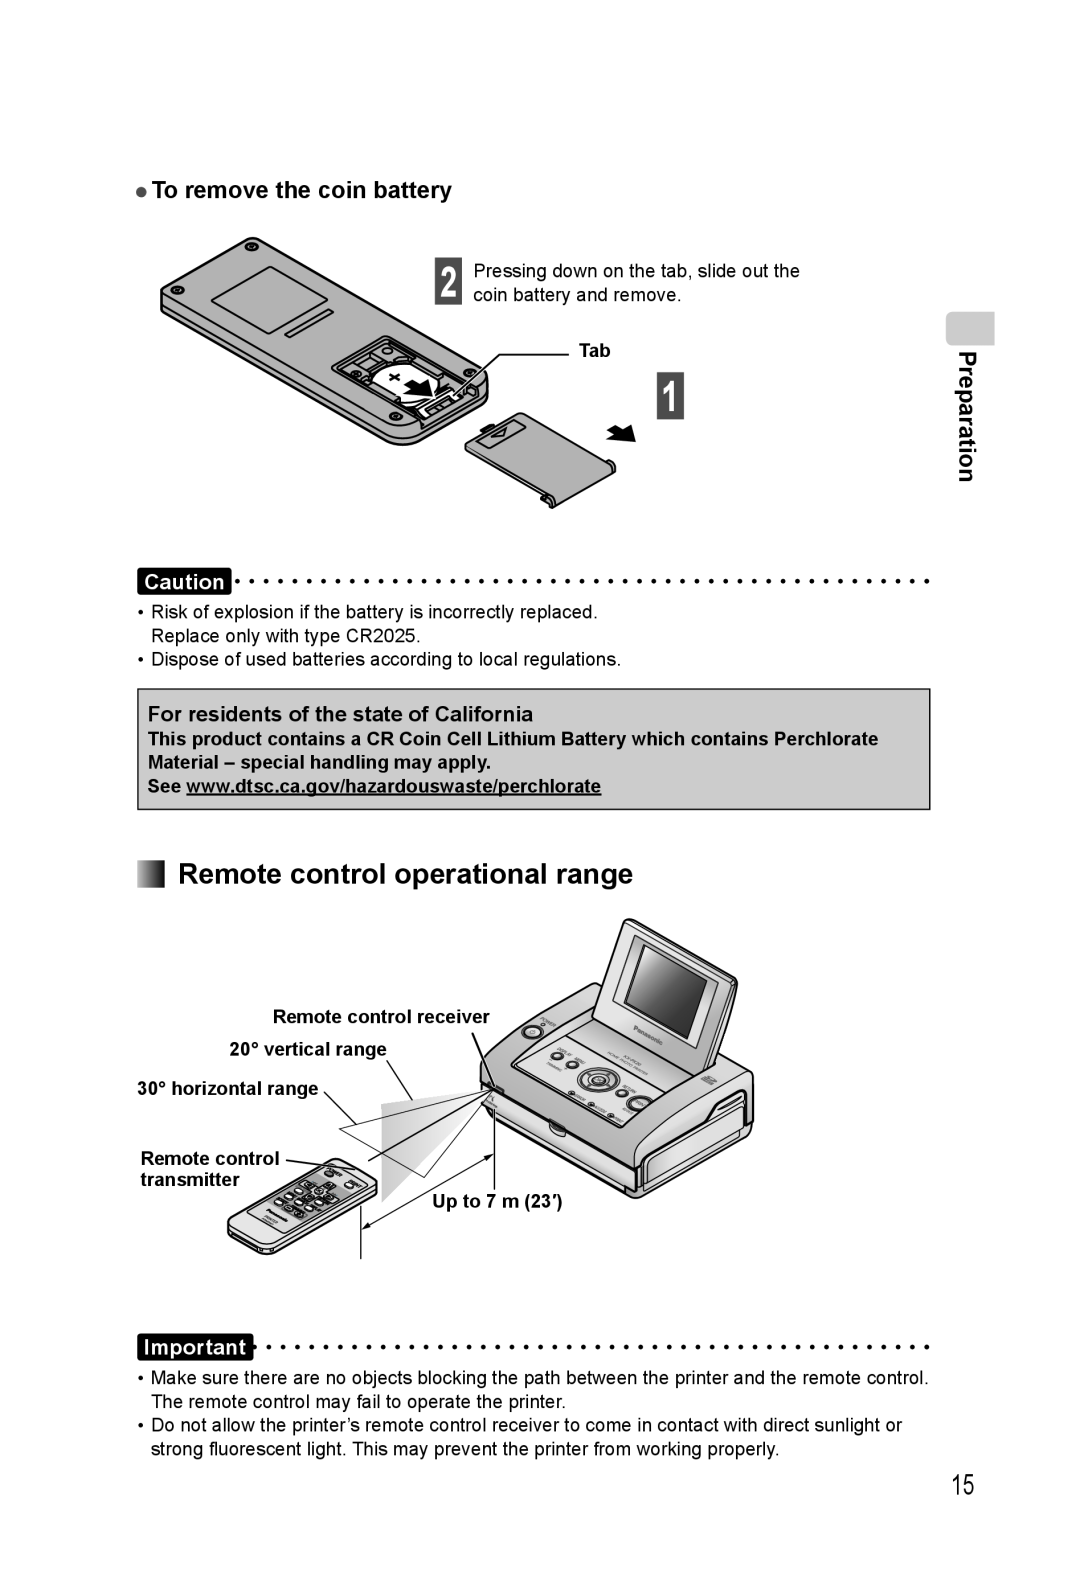 Panasonic KX-PX20M operating instructions Remote control operational range, To remove the coin battery, Preparation 